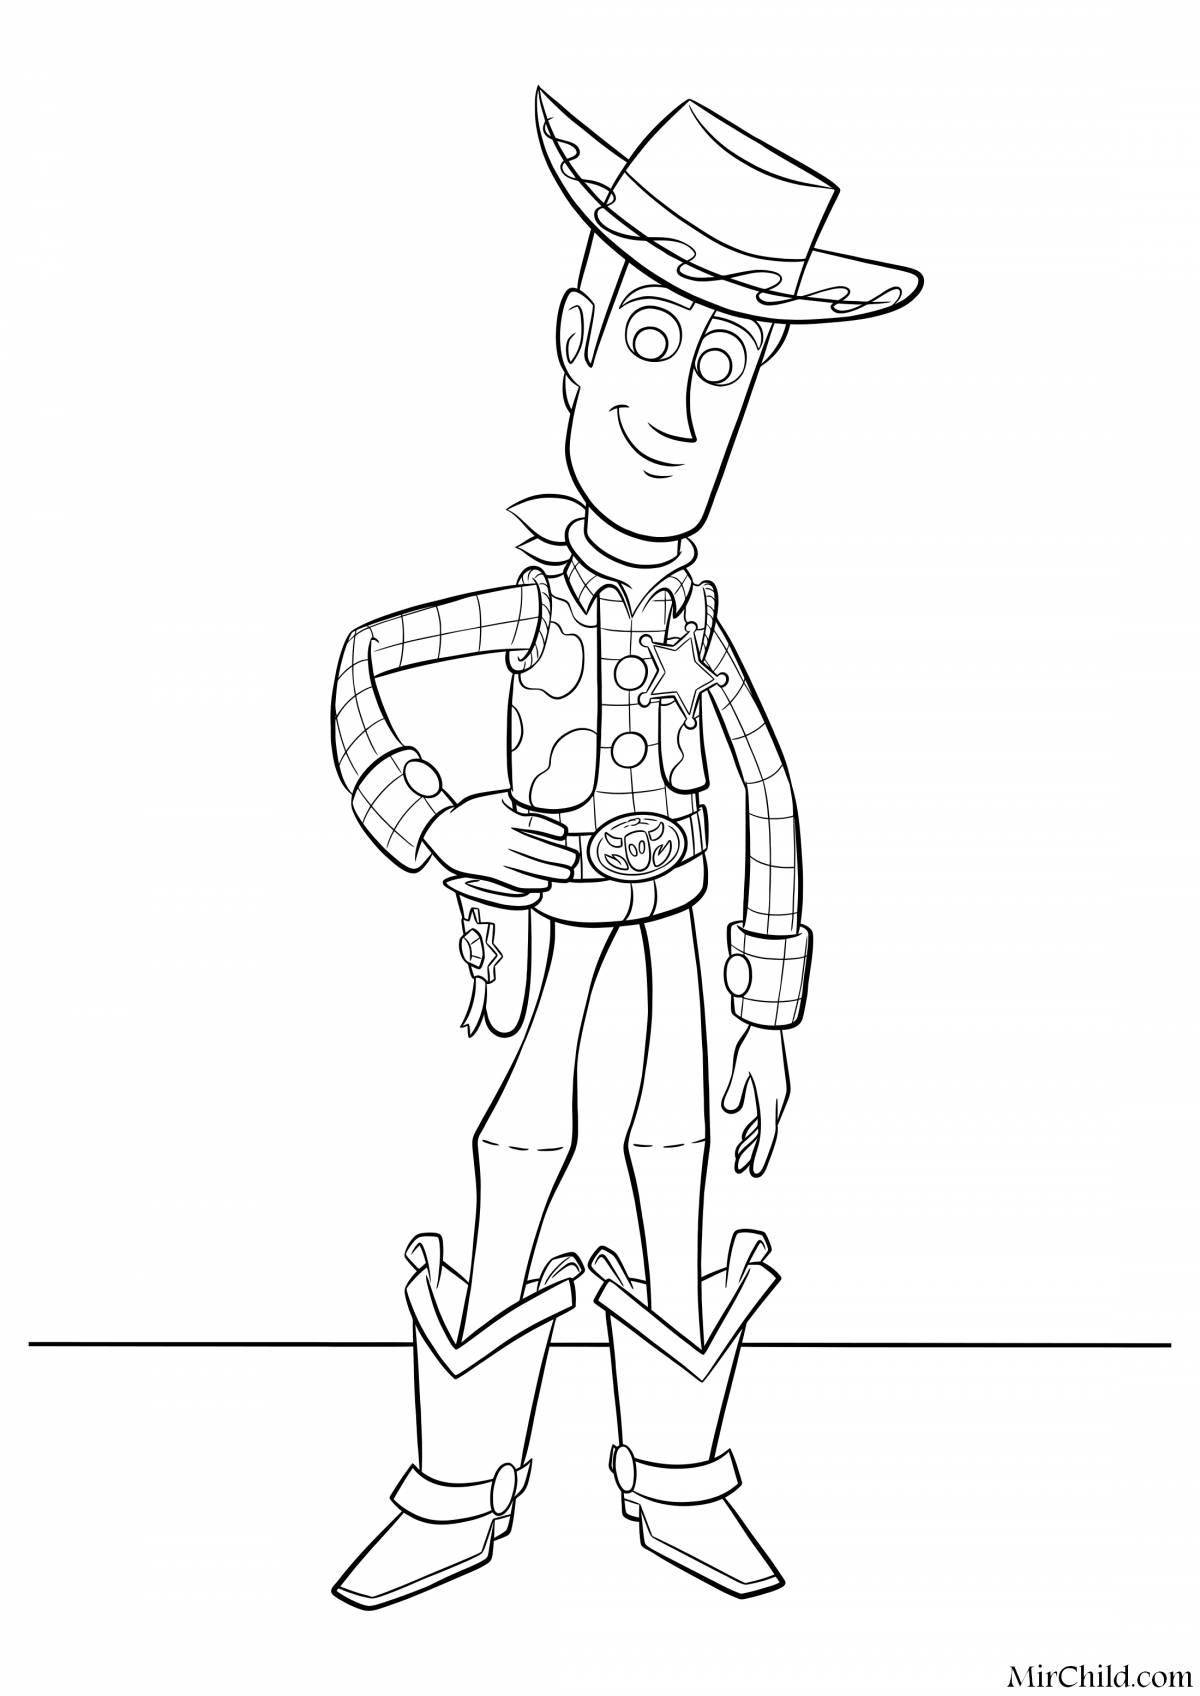 Animated Woody from Toy Story